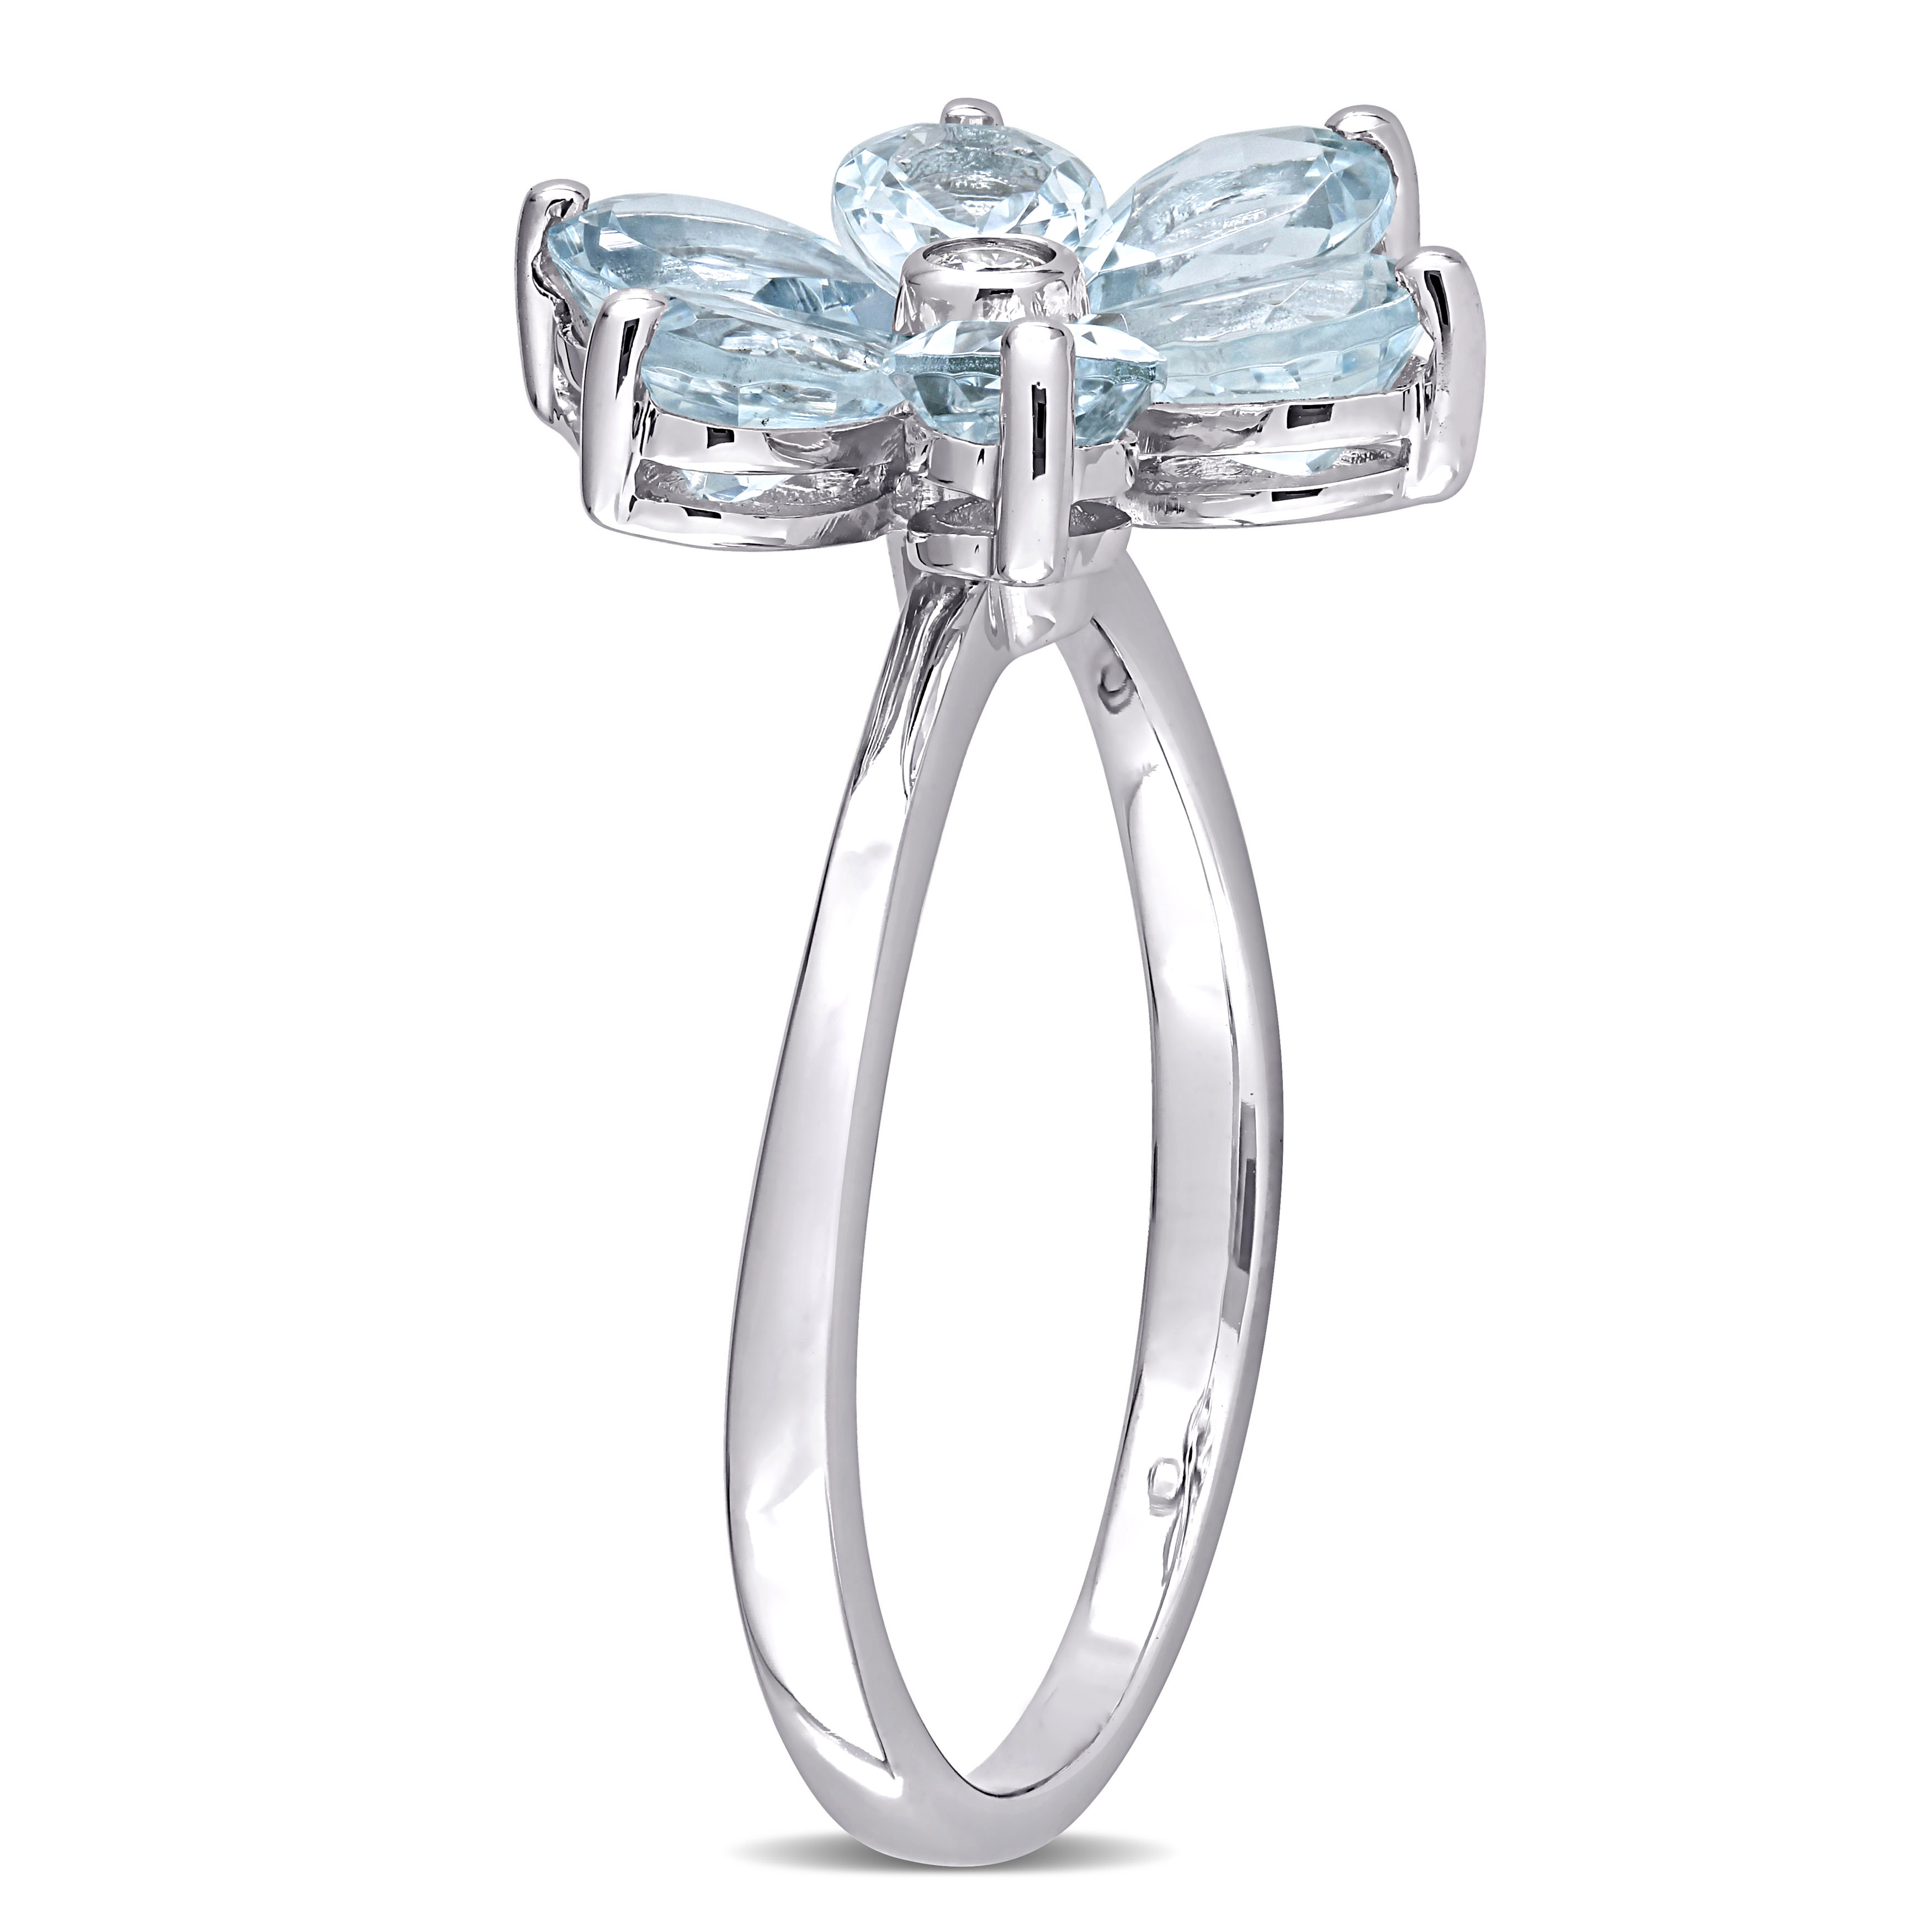 2 3/8 CT TGW Aquamarine and Diamond Accent Floral Ring in 14k White Gold